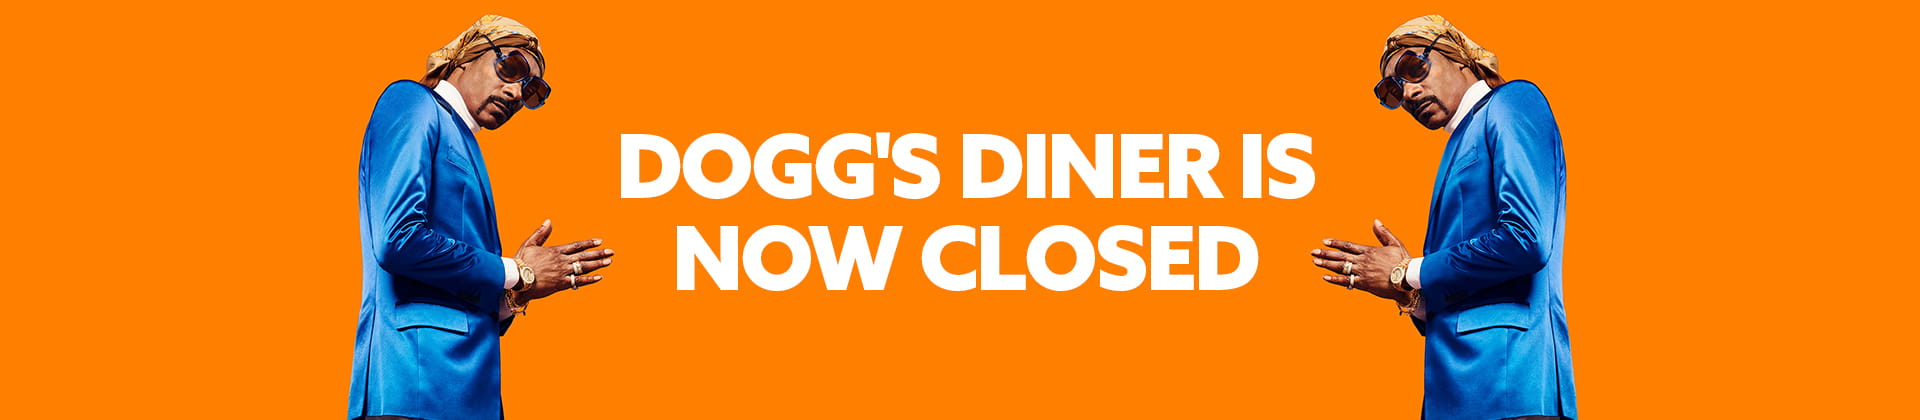 DOGG'S DINER IS NOW CLOSED